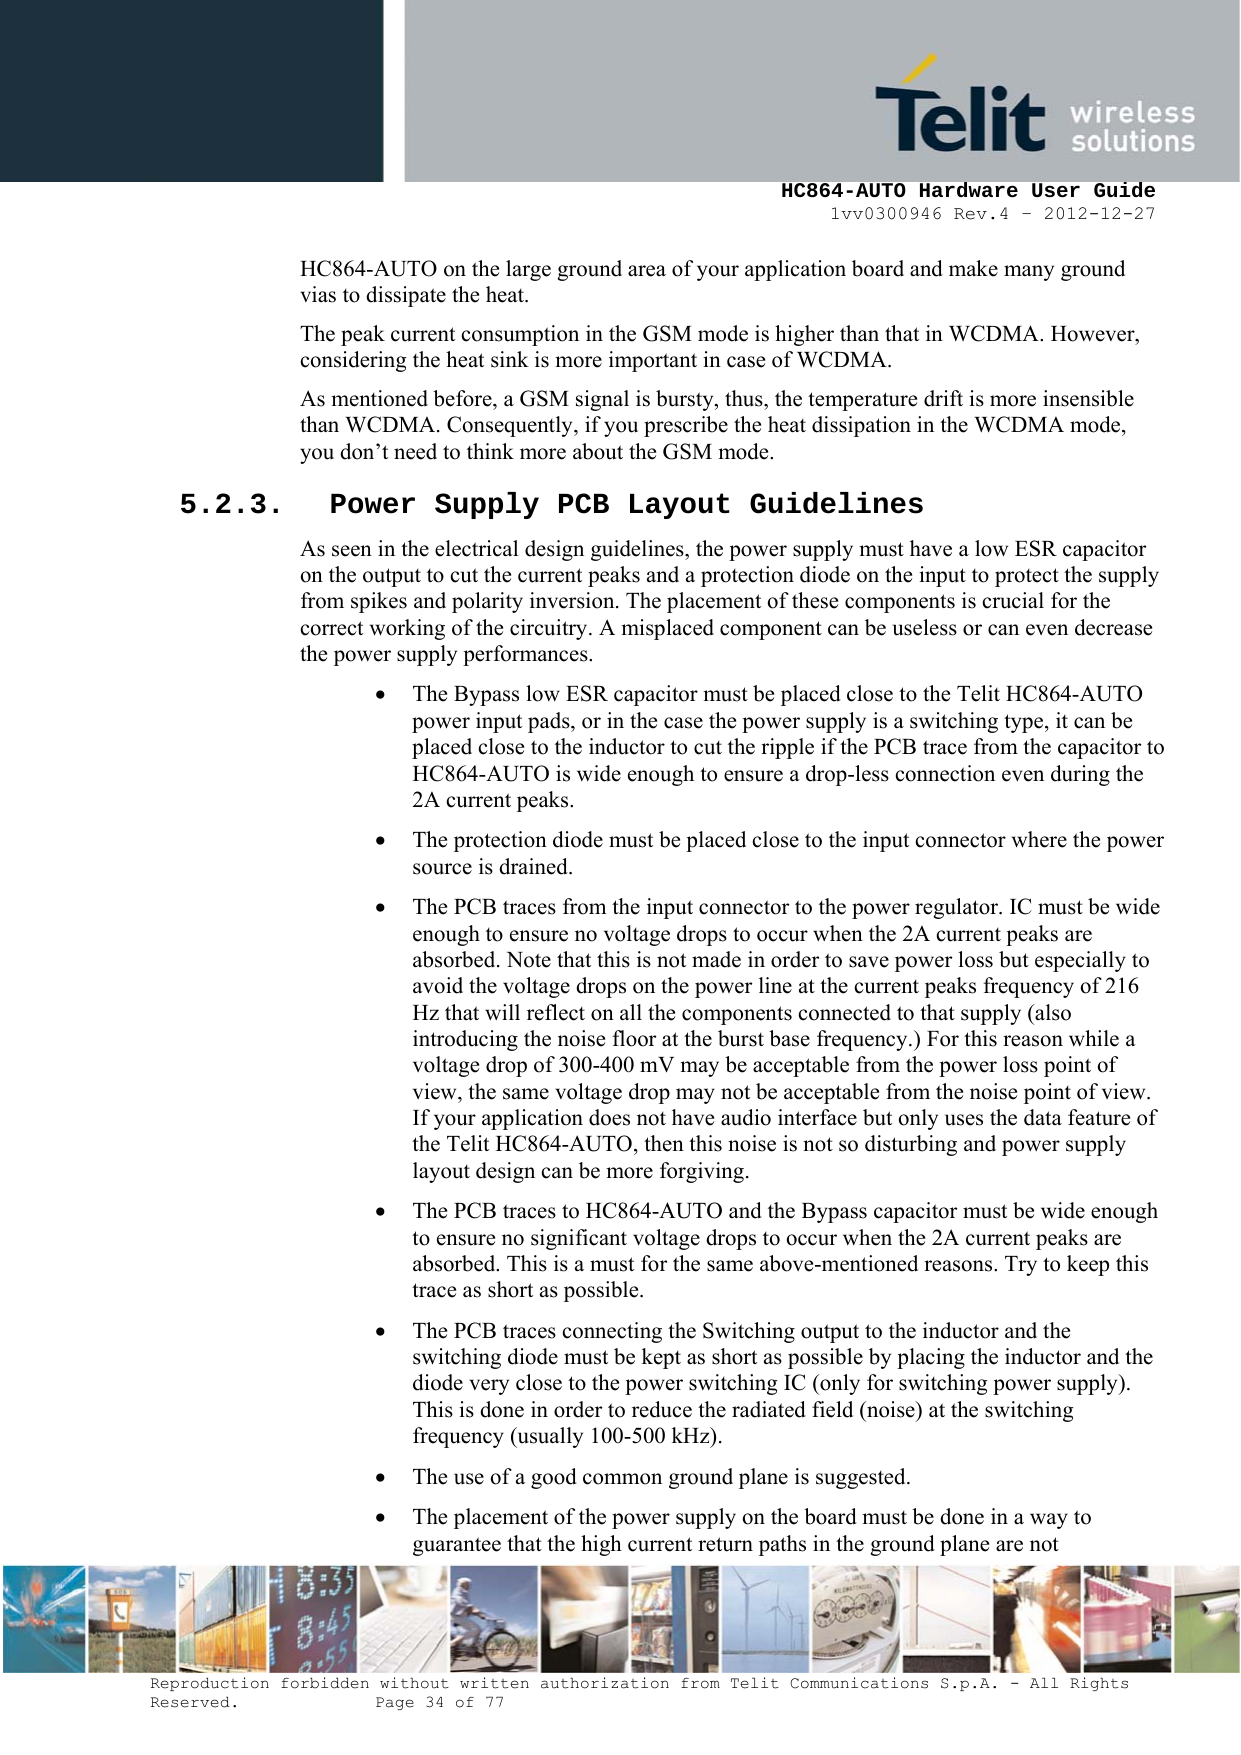     HC864-AUTO Hardware User Guide 1vv0300946 Rev.4 – 2012-12-27 Reproduction forbidden without written authorization from Telit Communications S.p.A. - All Rights Reserved.    Page 34 of 77  HC864-AUTO on the large ground area of your application board and make many ground vias to dissipate the heat. The peak current consumption in the GSM mode is higher than that in WCDMA. However, considering the heat sink is more important in case of WCDMA. As mentioned before, a GSM signal is bursty, thus, the temperature drift is more insensible than WCDMA. Consequently, if you prescribe the heat dissipation in the WCDMA mode, you don’t need to think more about the GSM mode. 5.2.3. Power Supply PCB Layout Guidelines As seen in the electrical design guidelines, the power supply must have a low ESR capacitor on the output to cut the current peaks and a protection diode on the input to protect the supply from spikes and polarity inversion. The placement of these components is crucial for the correct working of the circuitry. A misplaced component can be useless or can even decrease the power supply performances. • The Bypass low ESR capacitor must be placed close to the Telit HC864-AUTO power input pads, or in the case the power supply is a switching type, it can be placed close to the inductor to cut the ripple if the PCB trace from the capacitor to HC864-AUTO is wide enough to ensure a drop-less connection even during the 2A current peaks. • The protection diode must be placed close to the input connector where the power source is drained. • The PCB traces from the input connector to the power regulator. IC must be wide enough to ensure no voltage drops to occur when the 2A current peaks are absorbed. Note that this is not made in order to save power loss but especially to avoid the voltage drops on the power line at the current peaks frequency of 216 Hz that will reflect on all the components connected to that supply (also introducing the noise floor at the burst base frequency.) For this reason while a voltage drop of 300-400 mV may be acceptable from the power loss point of view, the same voltage drop may not be acceptable from the noise point of view. If your application does not have audio interface but only uses the data feature of the Telit HC864-AUTO, then this noise is not so disturbing and power supply layout design can be more forgiving. • The PCB traces to HC864-AUTO and the Bypass capacitor must be wide enough to ensure no significant voltage drops to occur when the 2A current peaks are absorbed. This is a must for the same above-mentioned reasons. Try to keep this trace as short as possible. • The PCB traces connecting the Switching output to the inductor and the switching diode must be kept as short as possible by placing the inductor and the diode very close to the power switching IC (only for switching power supply). This is done in order to reduce the radiated field (noise) at the switching frequency (usually 100-500 kHz). • The use of a good common ground plane is suggested. • The placement of the power supply on the board must be done in a way to guarantee that the high current return paths in the ground plane are not 